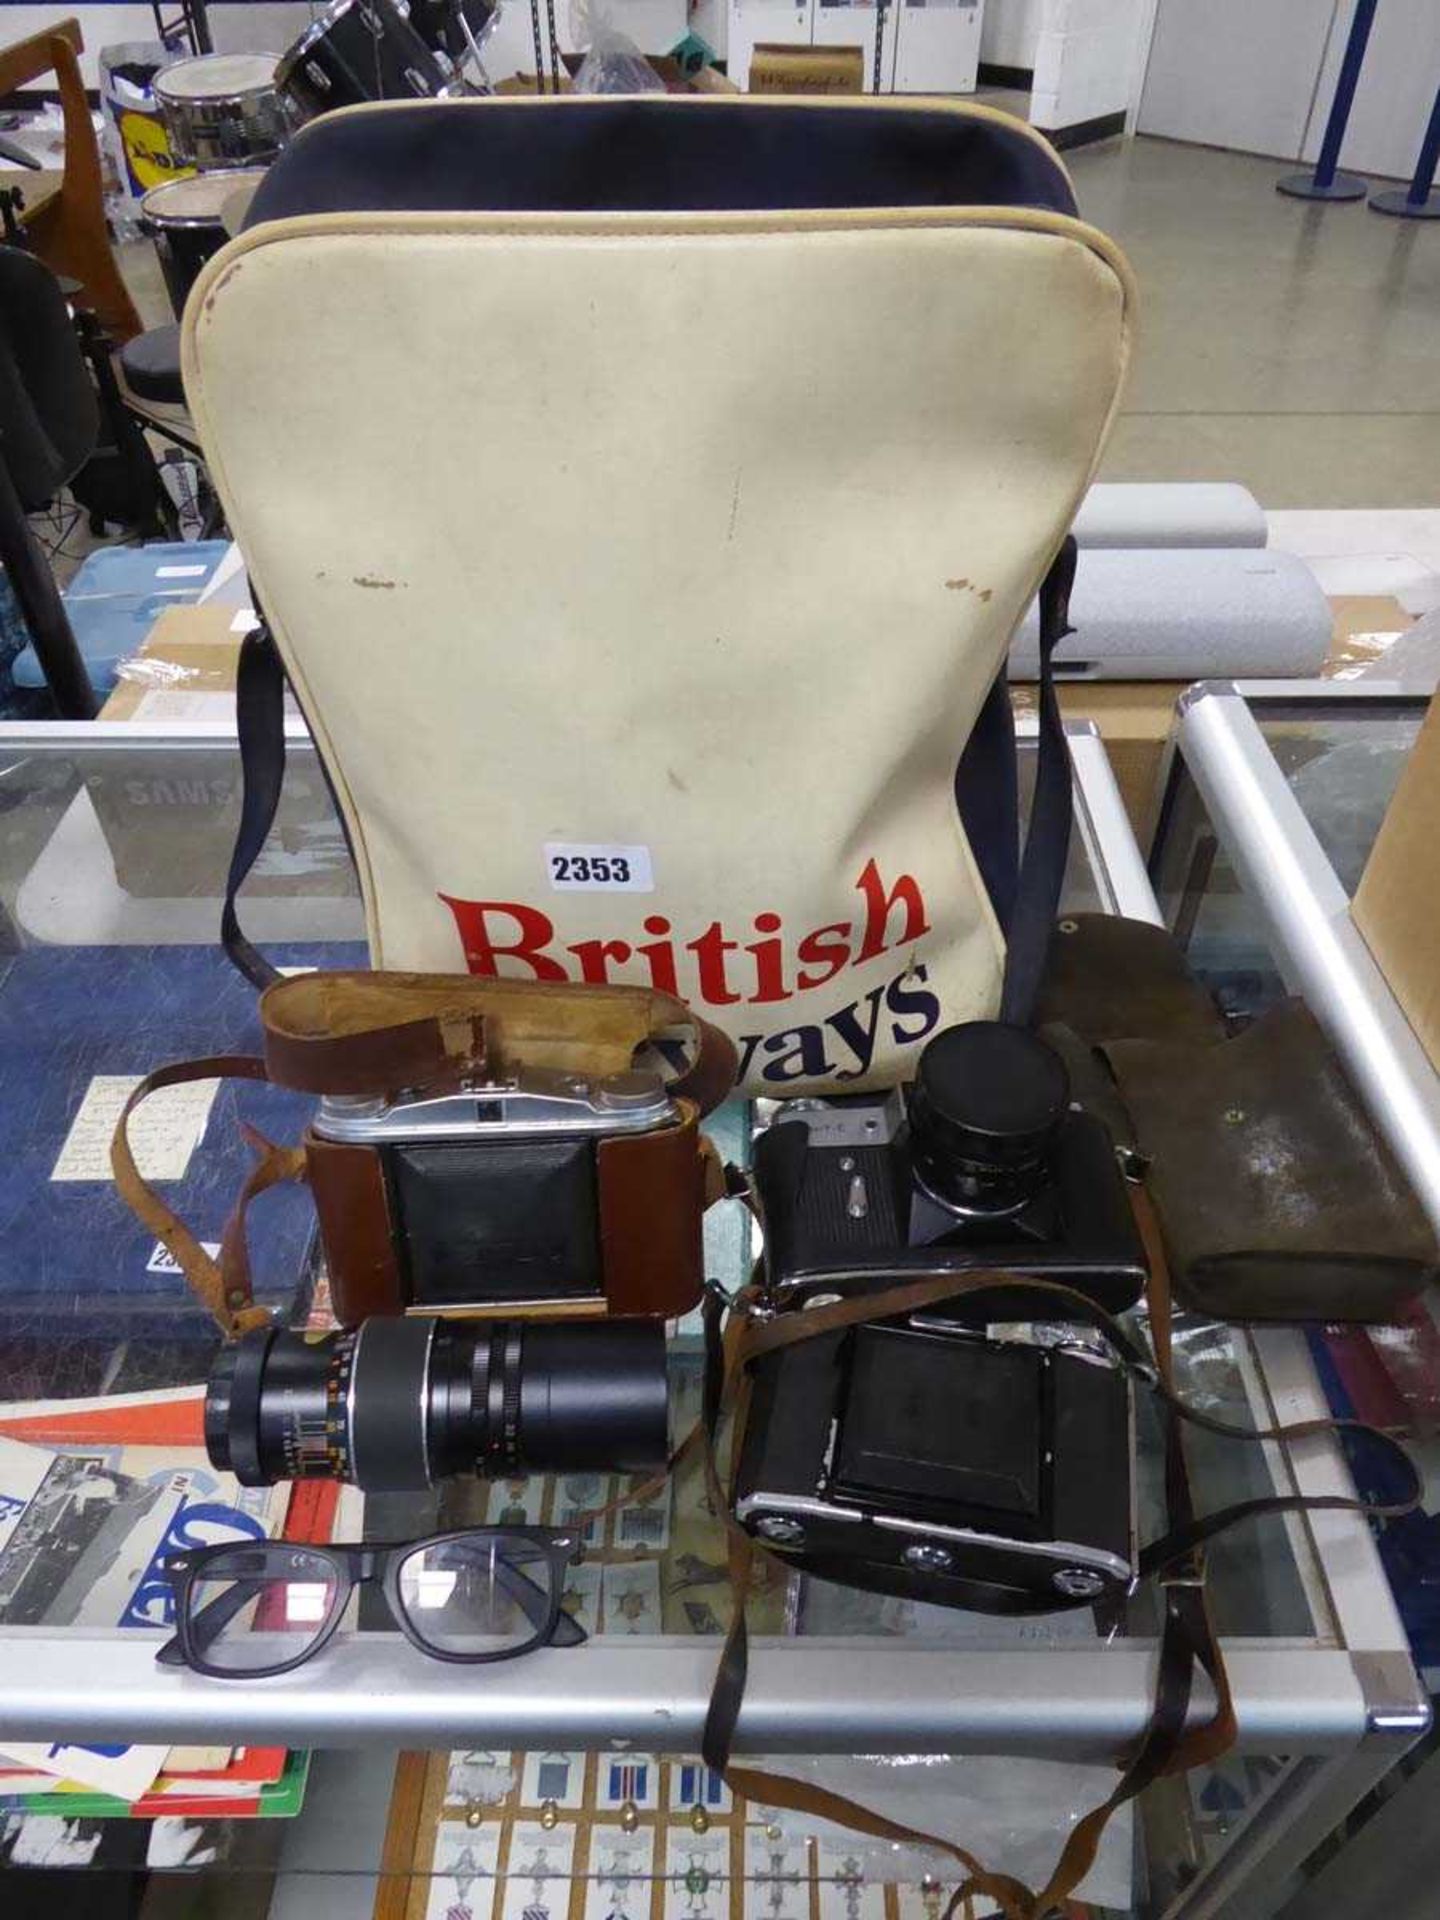 British Airways vintage bag with various film camera equipment which includes a Zenit camera